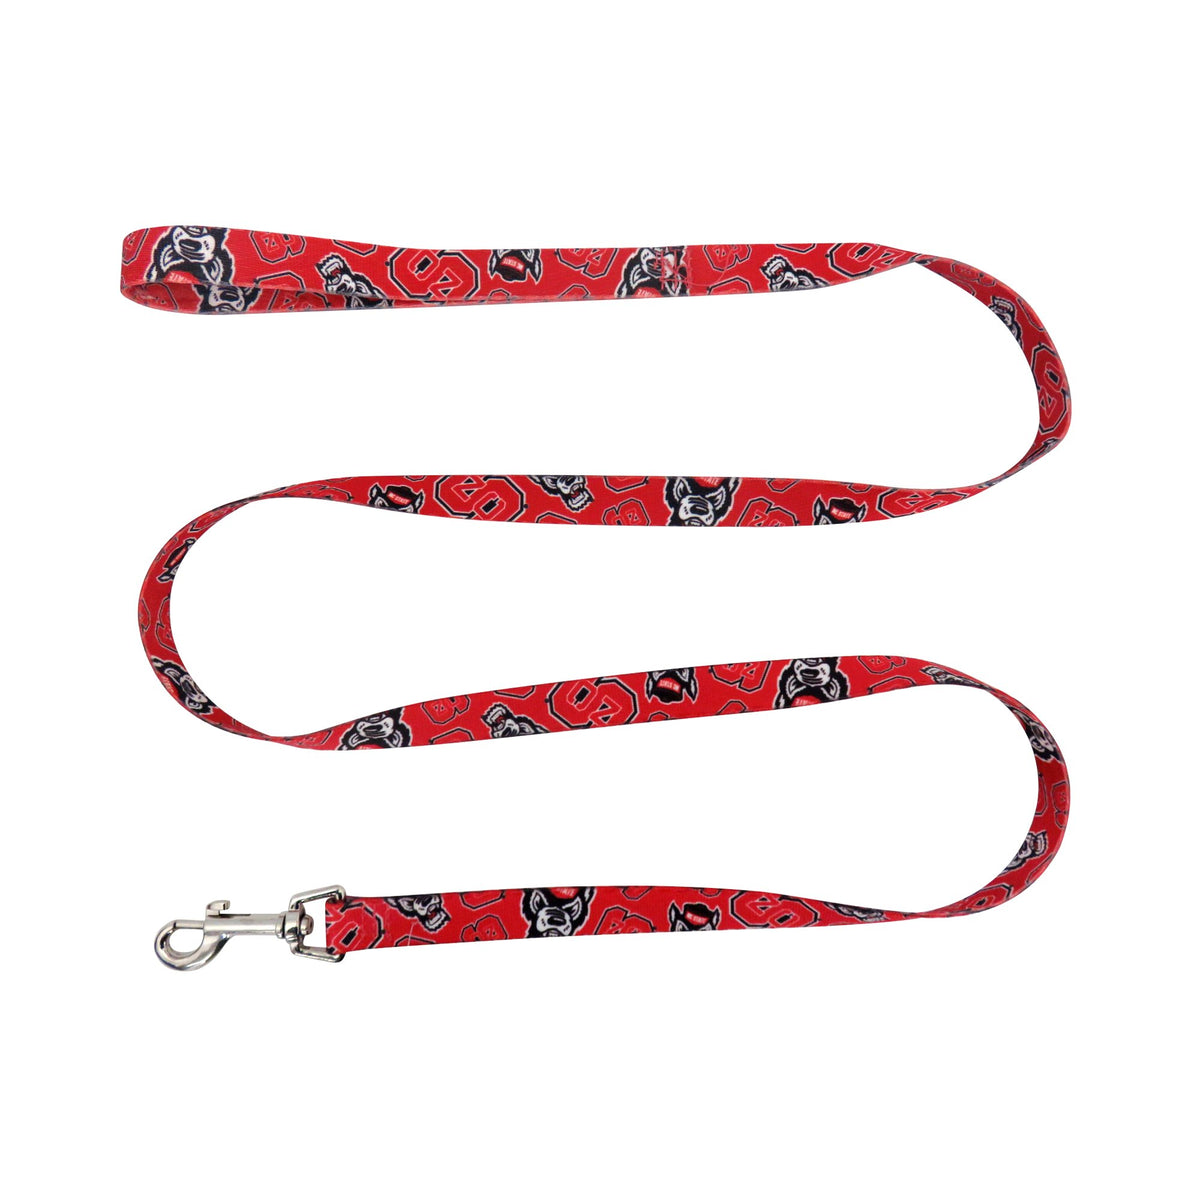 Official Minnesota Twins Pet Gear, Twins Collars, Leashes, Chew Toys